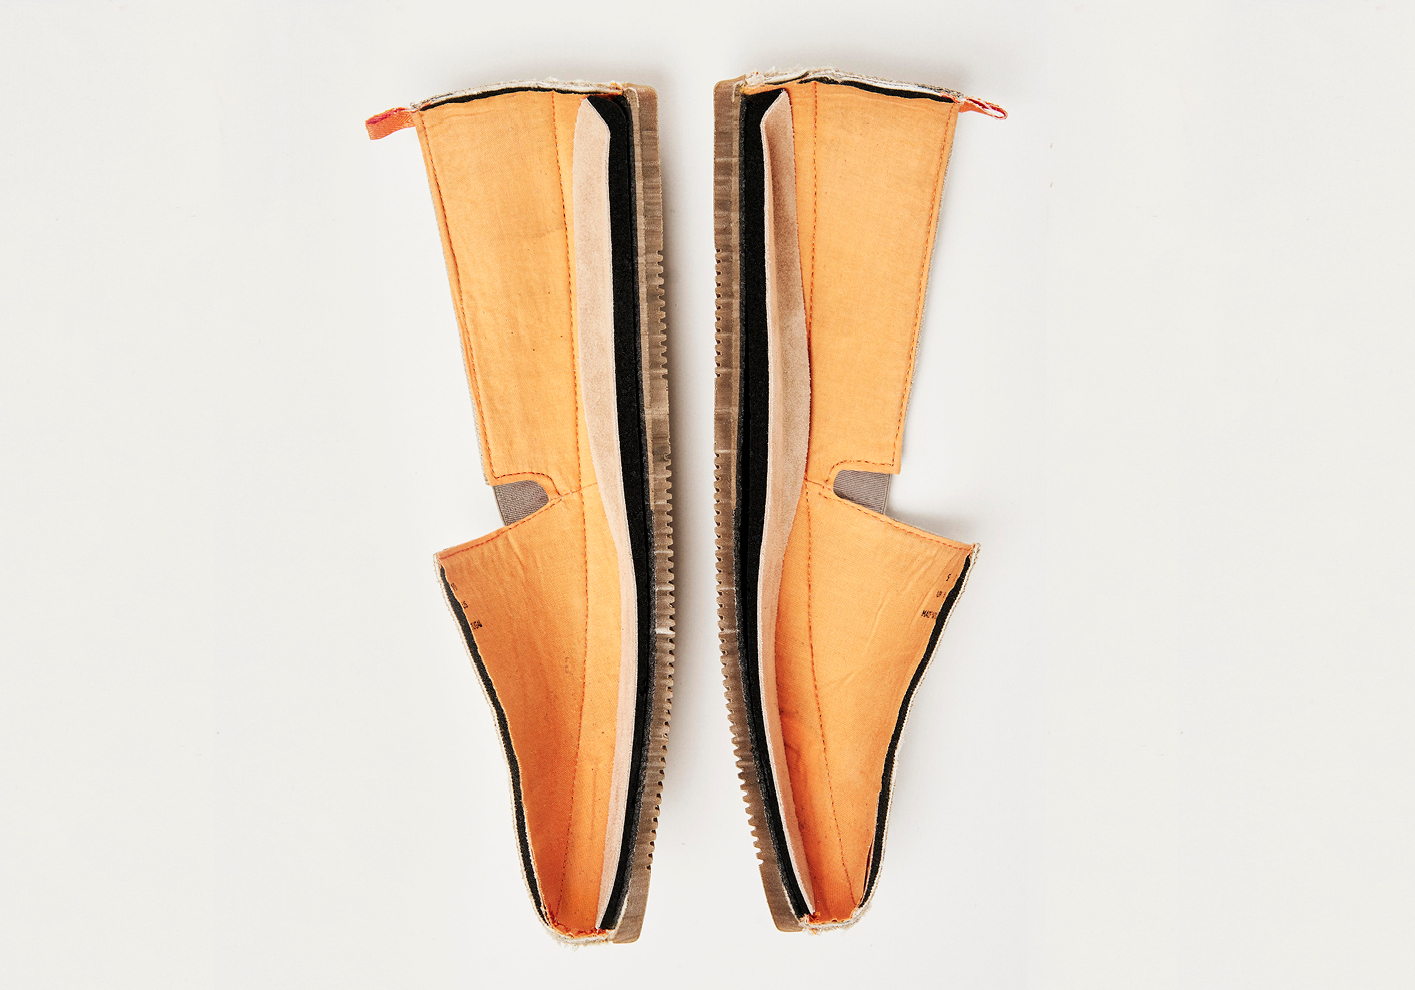 Mulo espadrille in profile, a design that is built on a traditional Oxford last